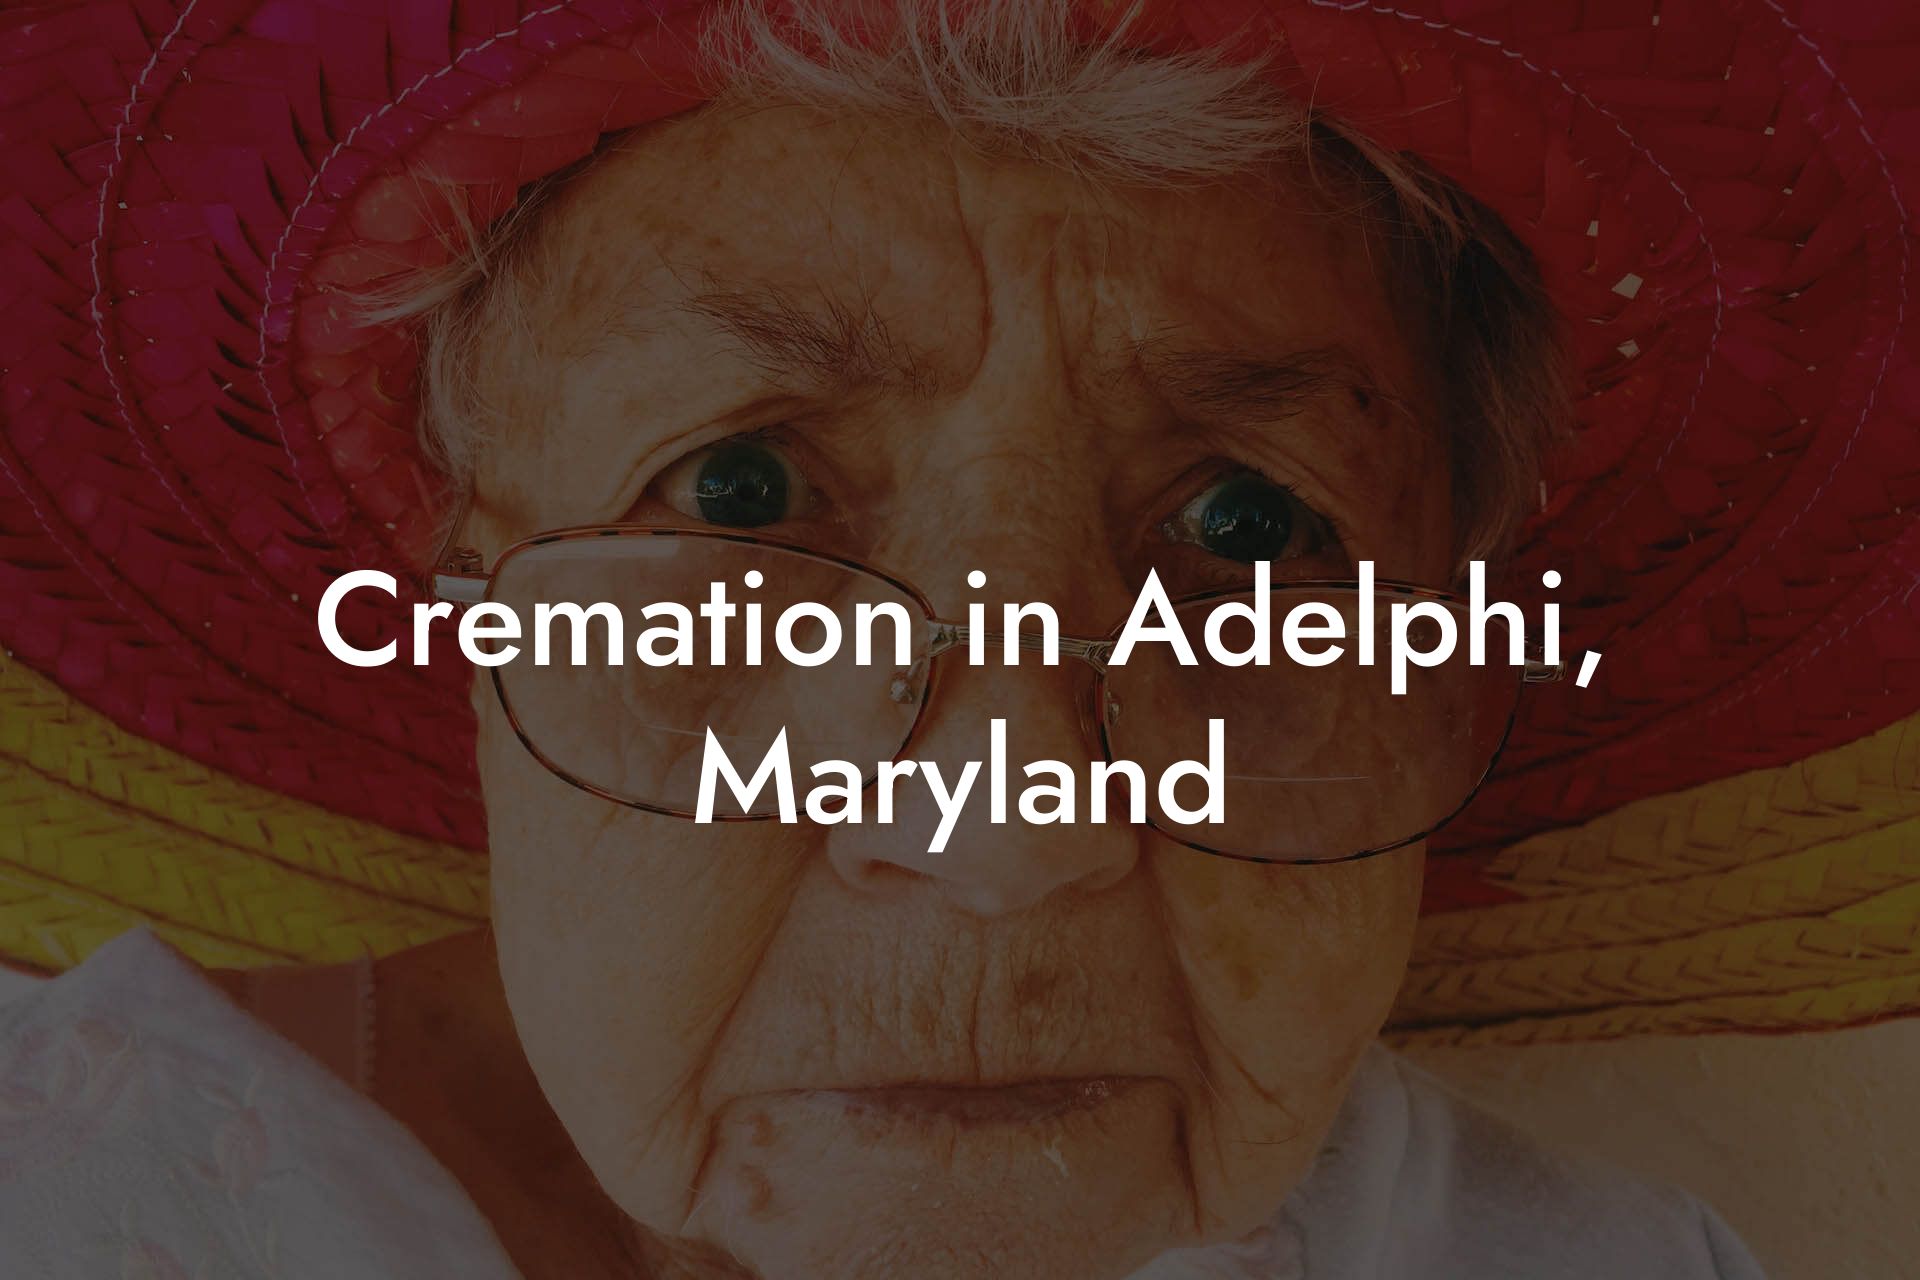 Cremation in Adelphi, Maryland